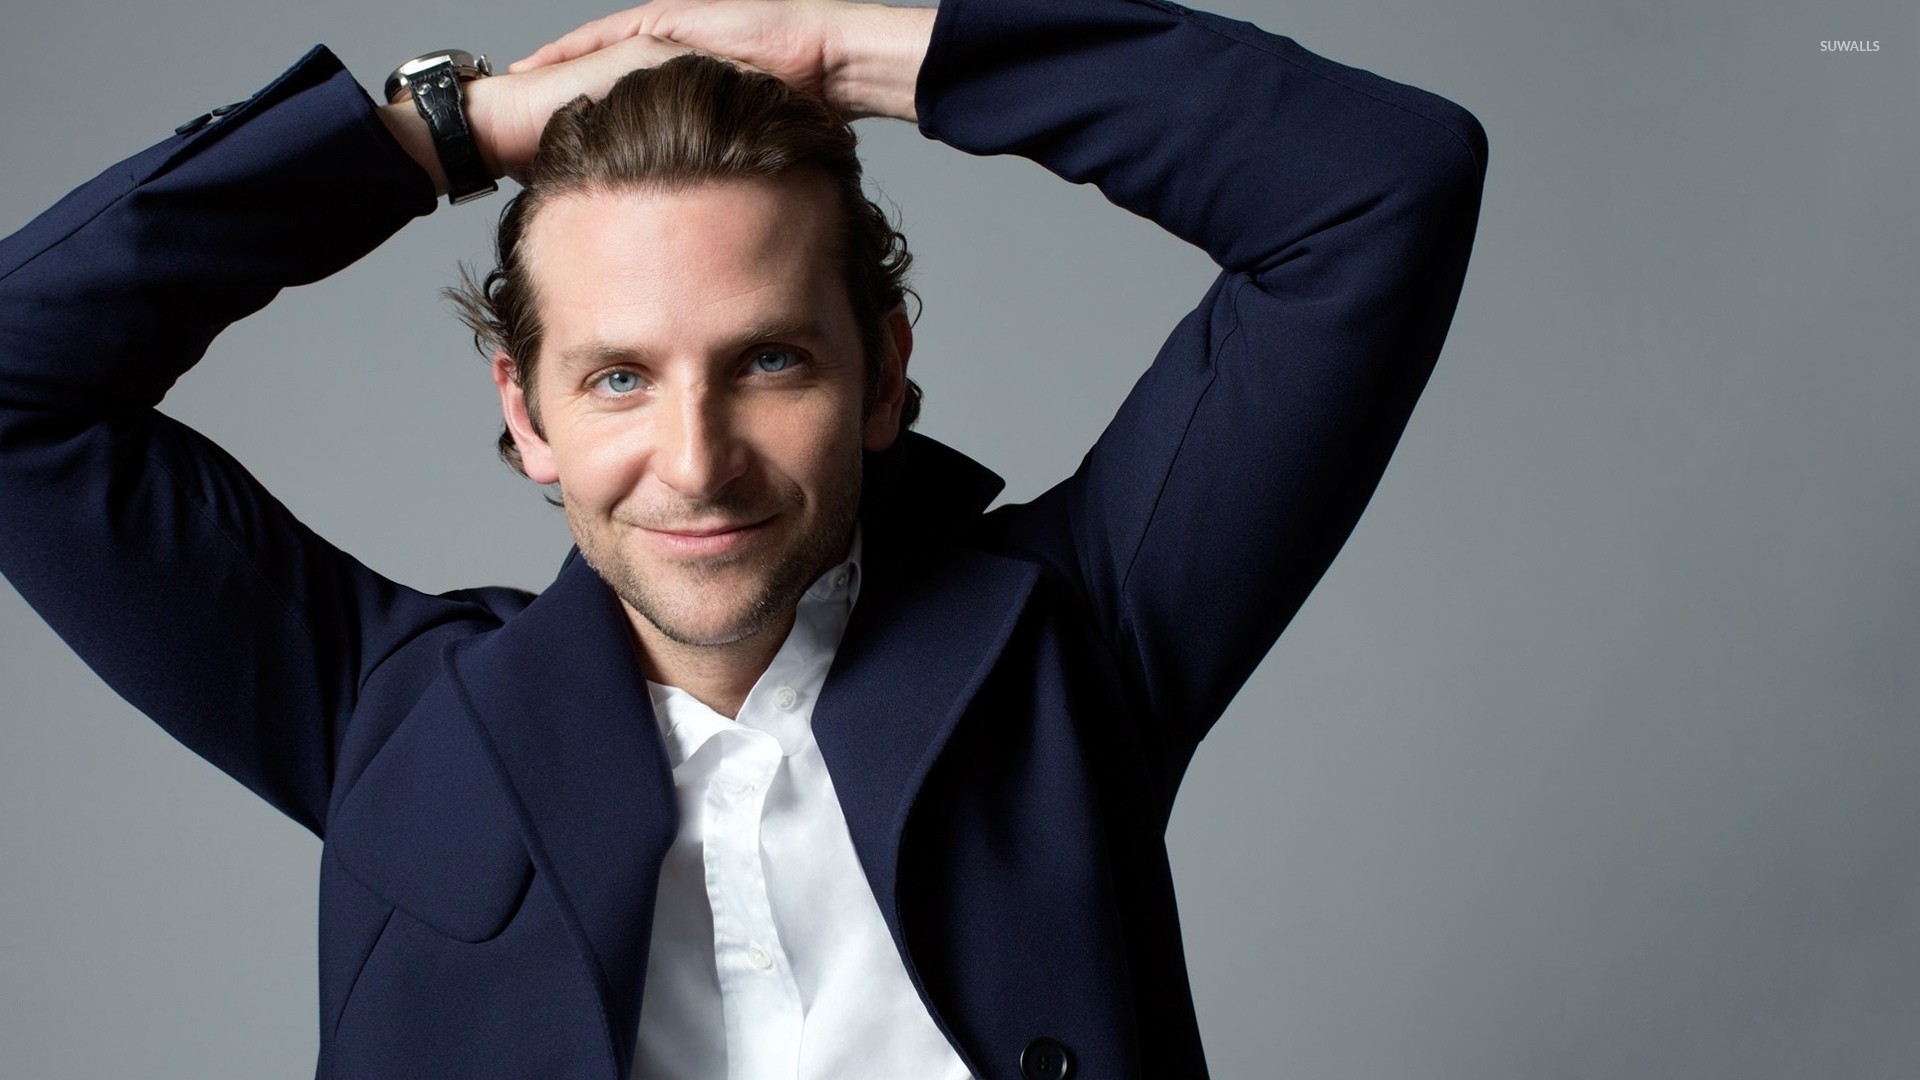 1920x1080 Bradley Cooper with both hands on his head wallpaper